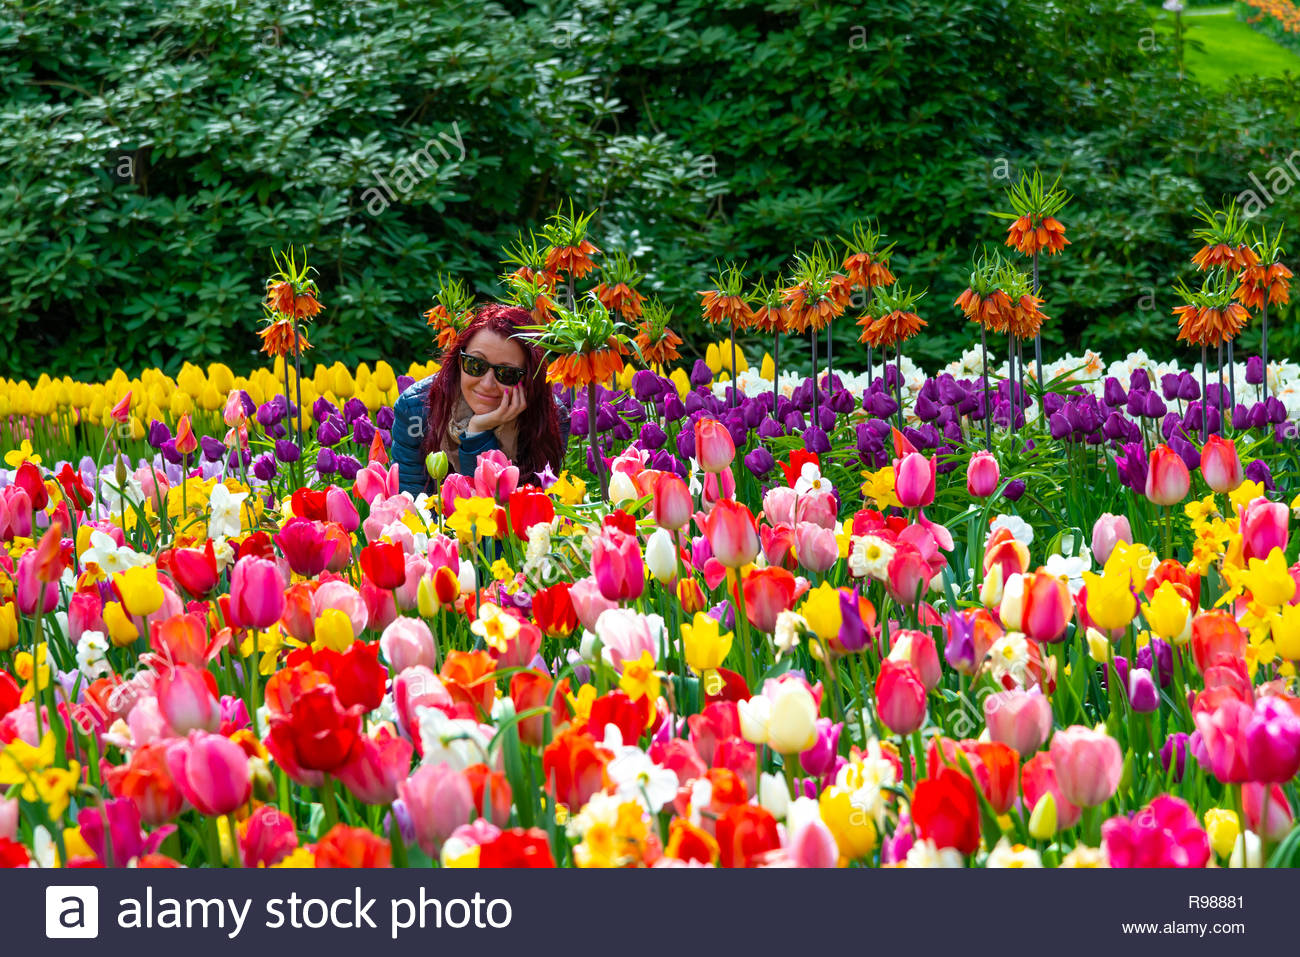 pretty girl smiling amongst the beautiful spring flowers in the keukenhof gardens lisse holland the netherlands R